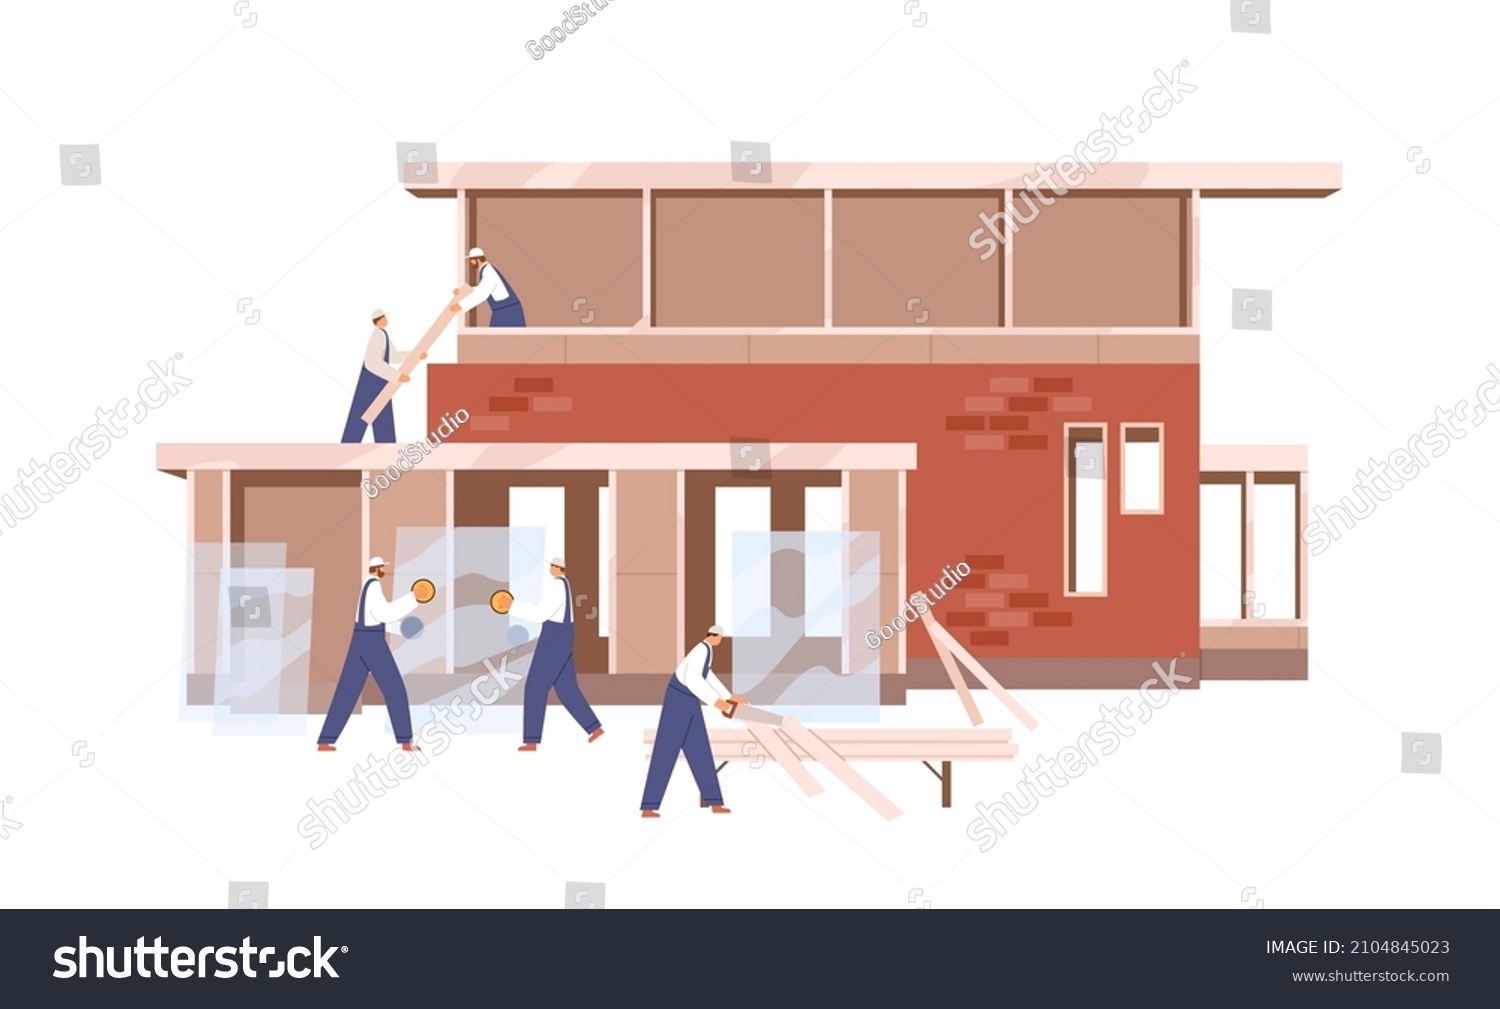 SVG of Workers building home, installing windows. Builders work outdoors, constructing residential house. Construction and renovation process. Flat graphic vector illustration isolated on white background svg